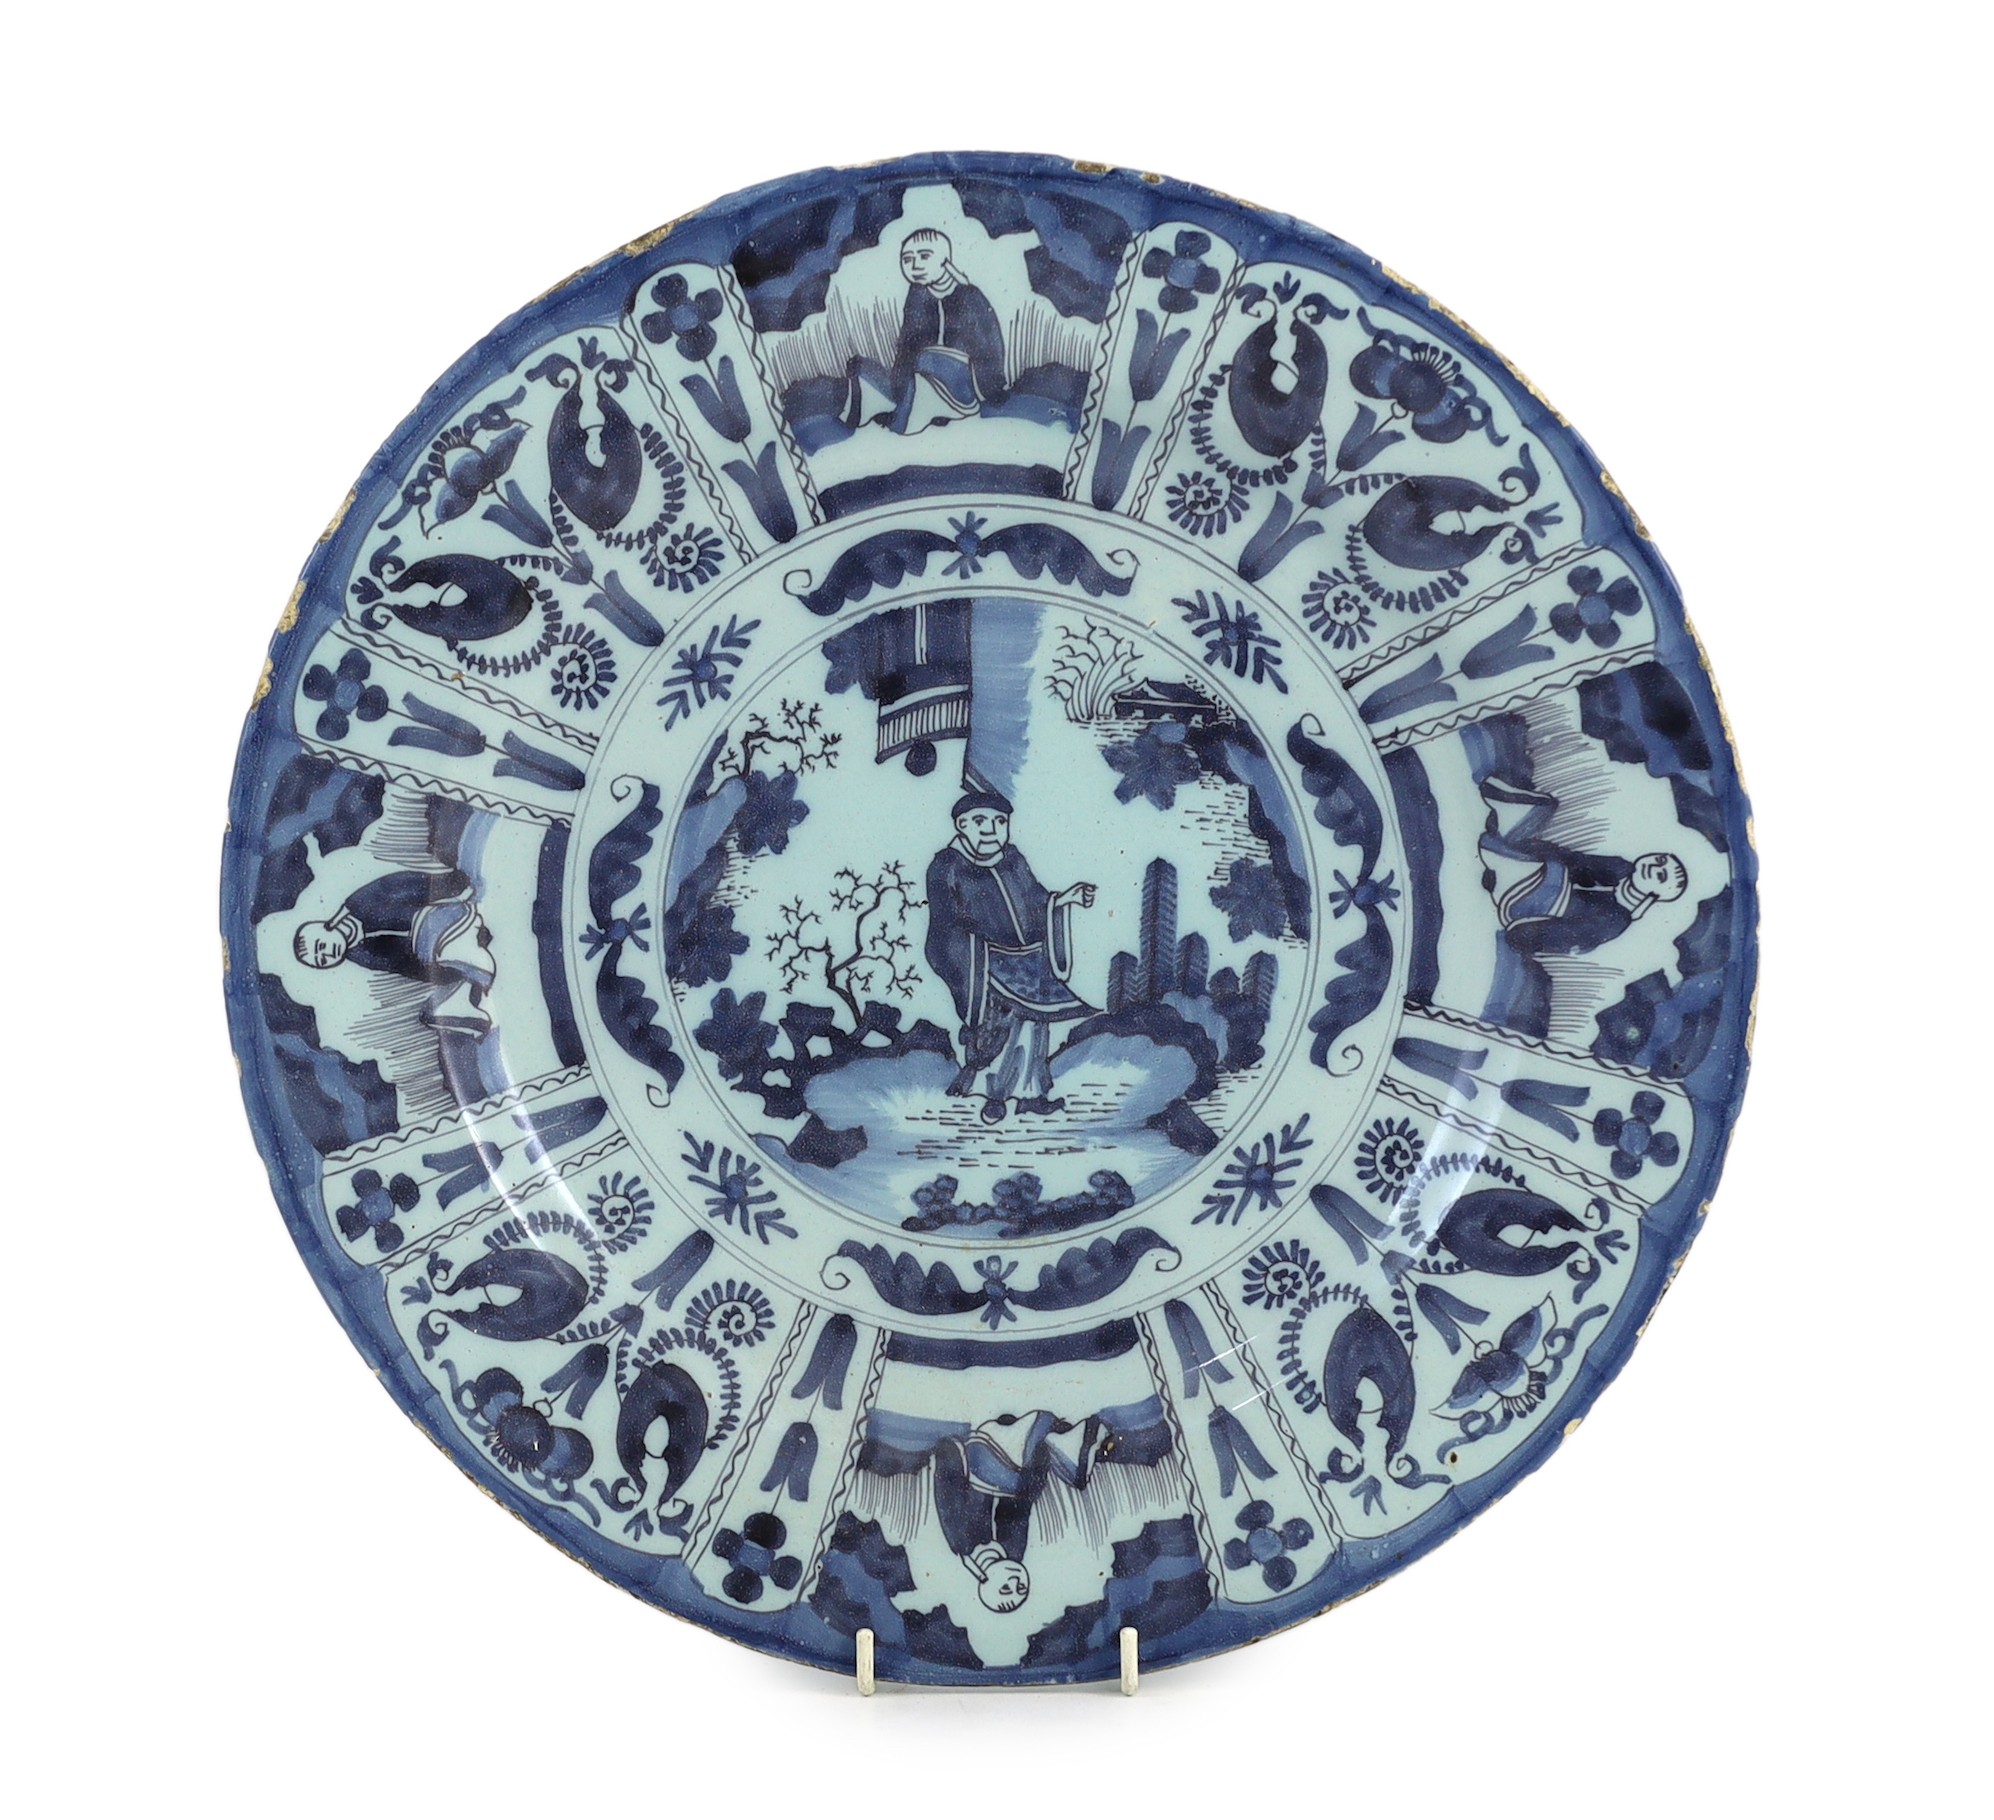 A Delft blue and white Kraak style dish, late 17th century, 34cm diameter